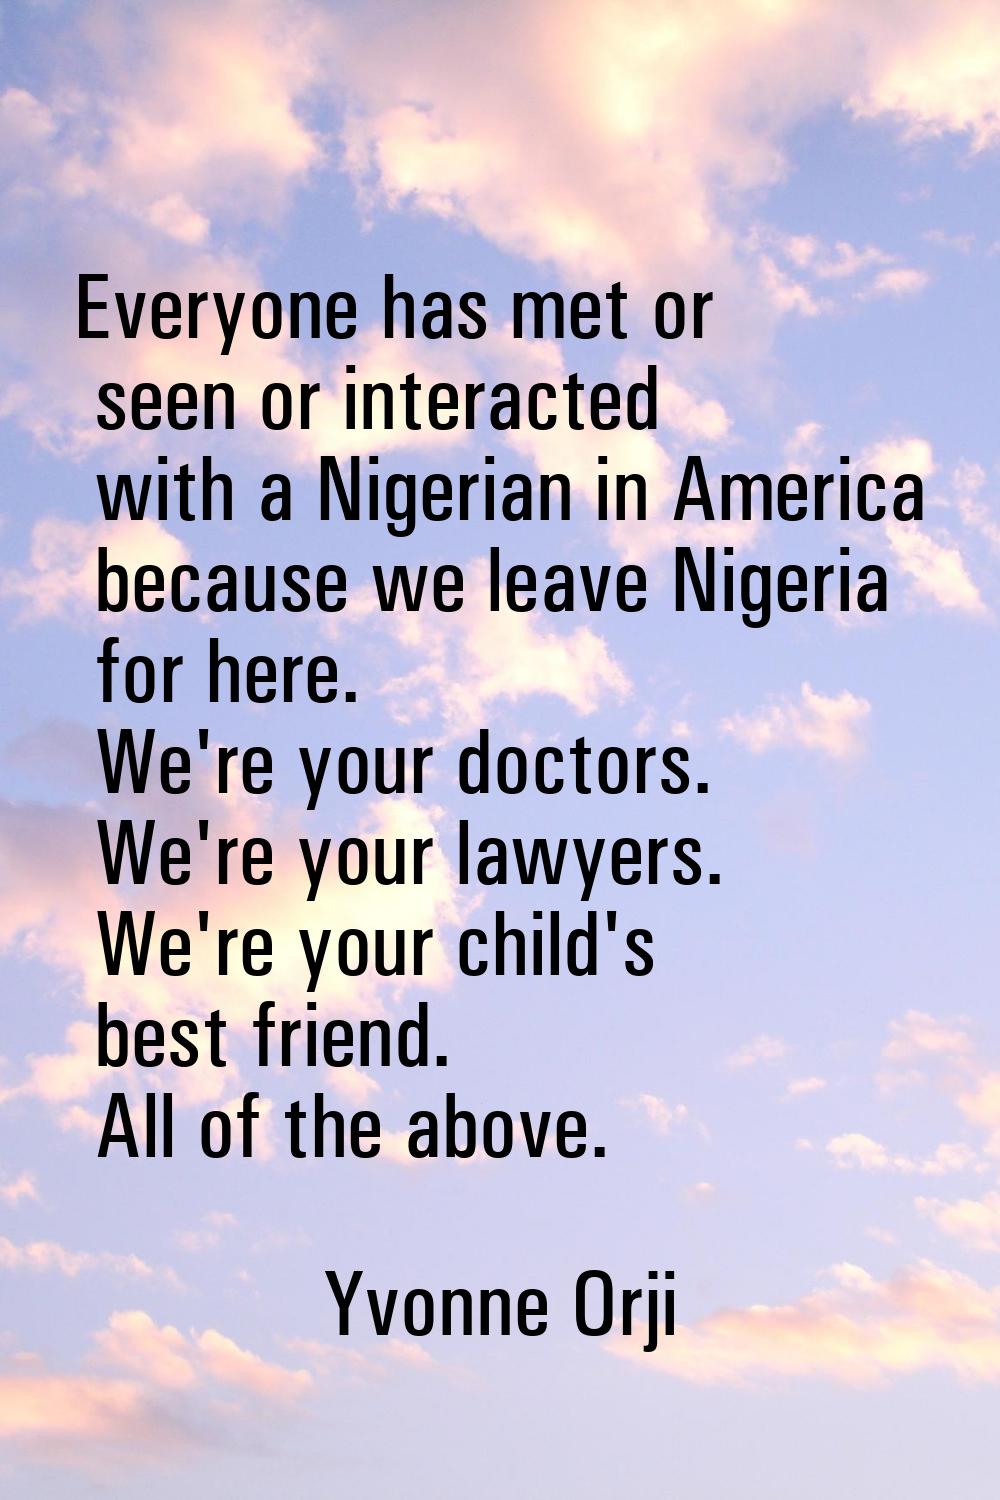 Everyone has met or seen or interacted with a Nigerian in America because we leave Nigeria for here